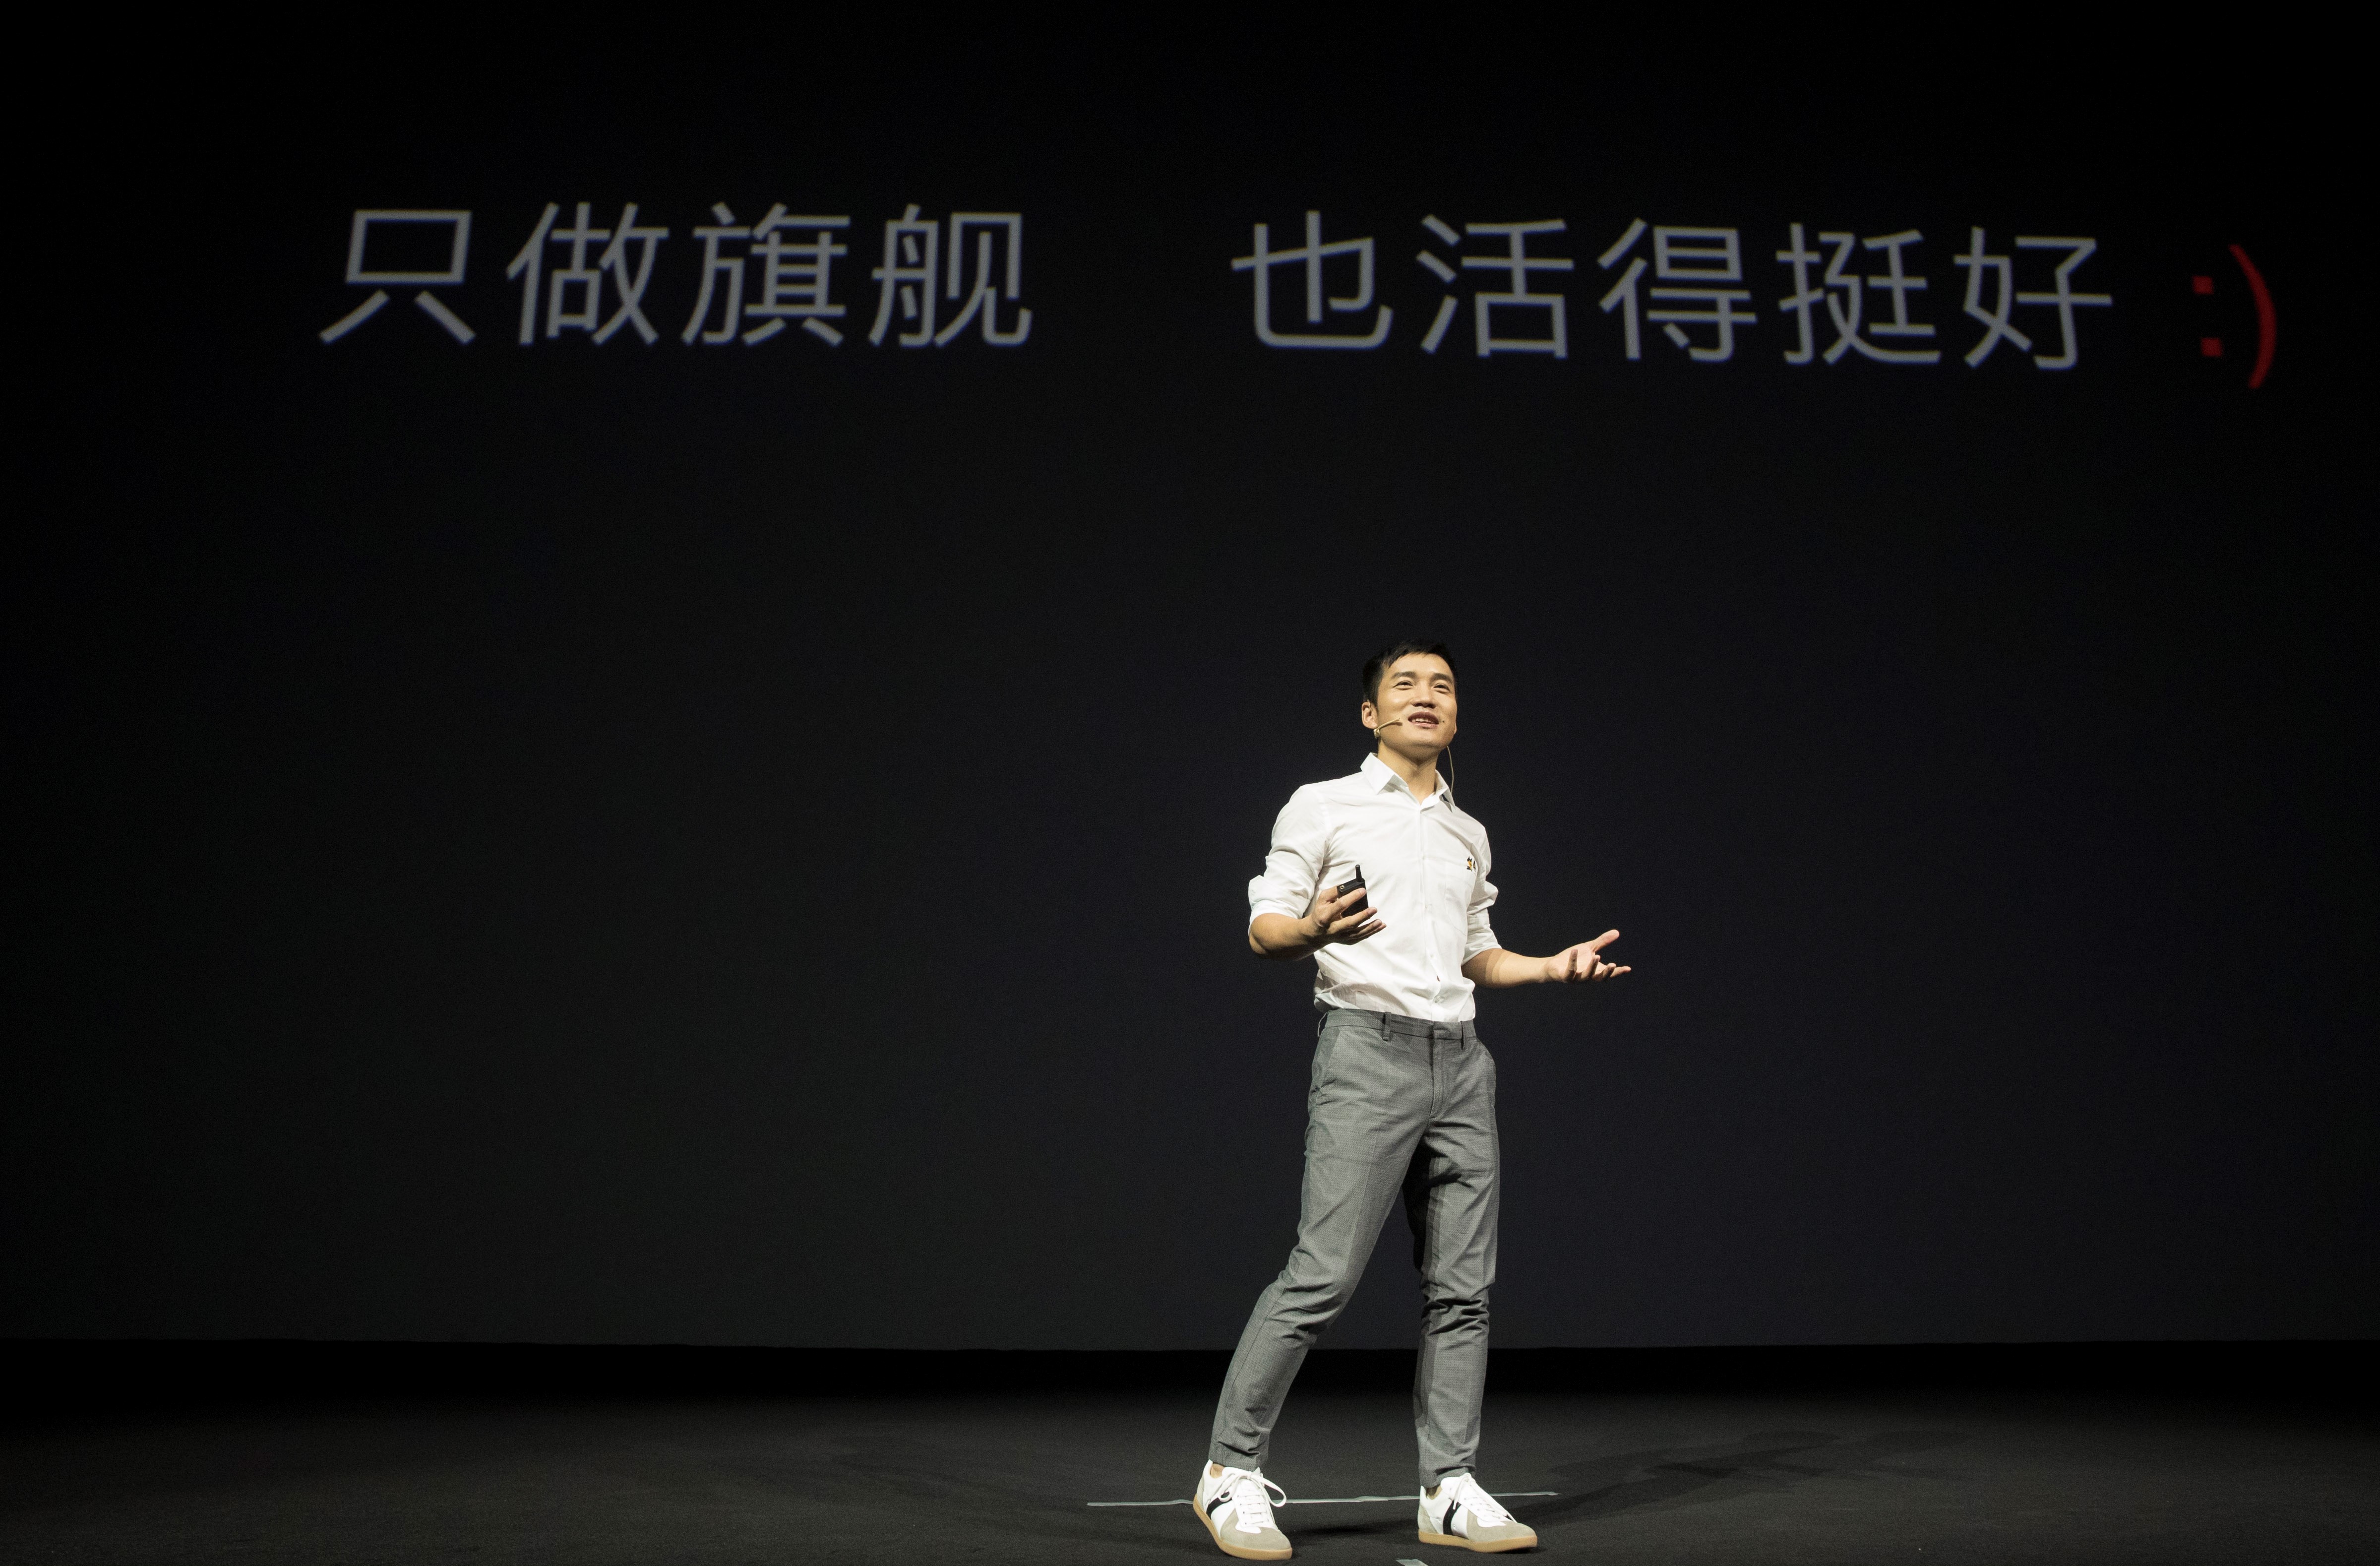 OnePlus Founder: The Differences Between OnePlus and Xiaomi